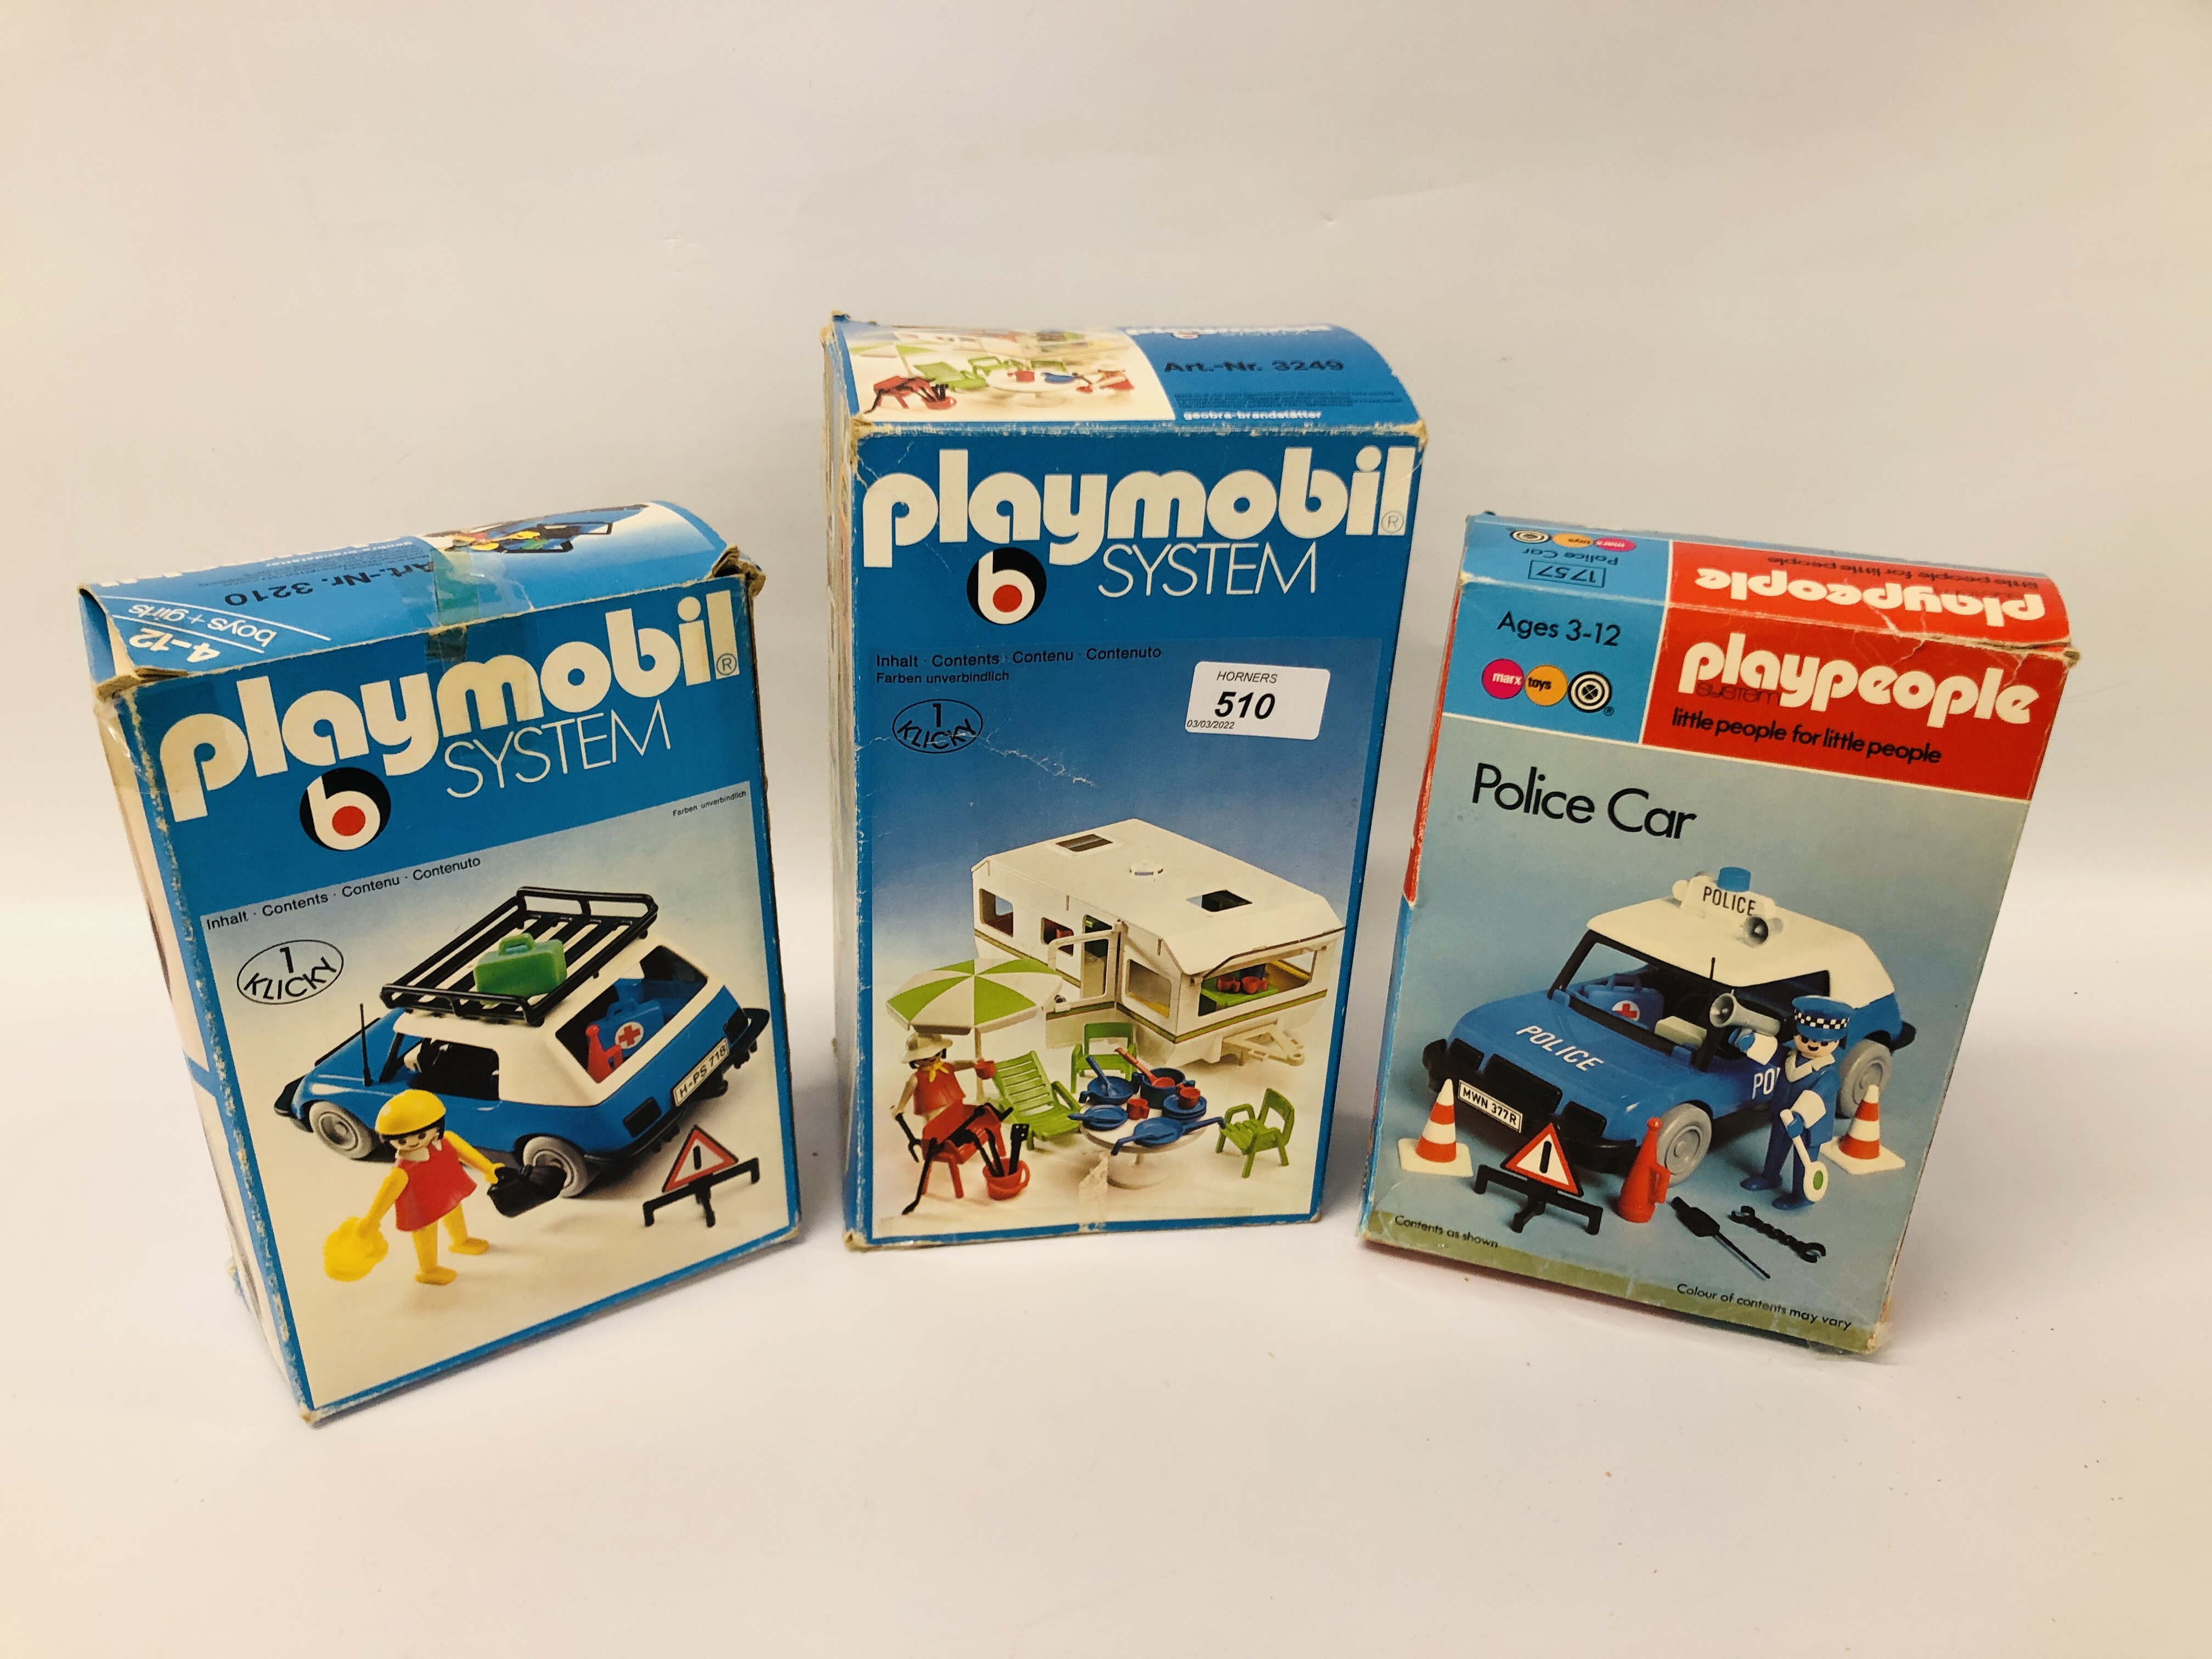 3 BOXES OF PLAYMOBIL SYSTEM TO INCLUDE POLICE CAR,